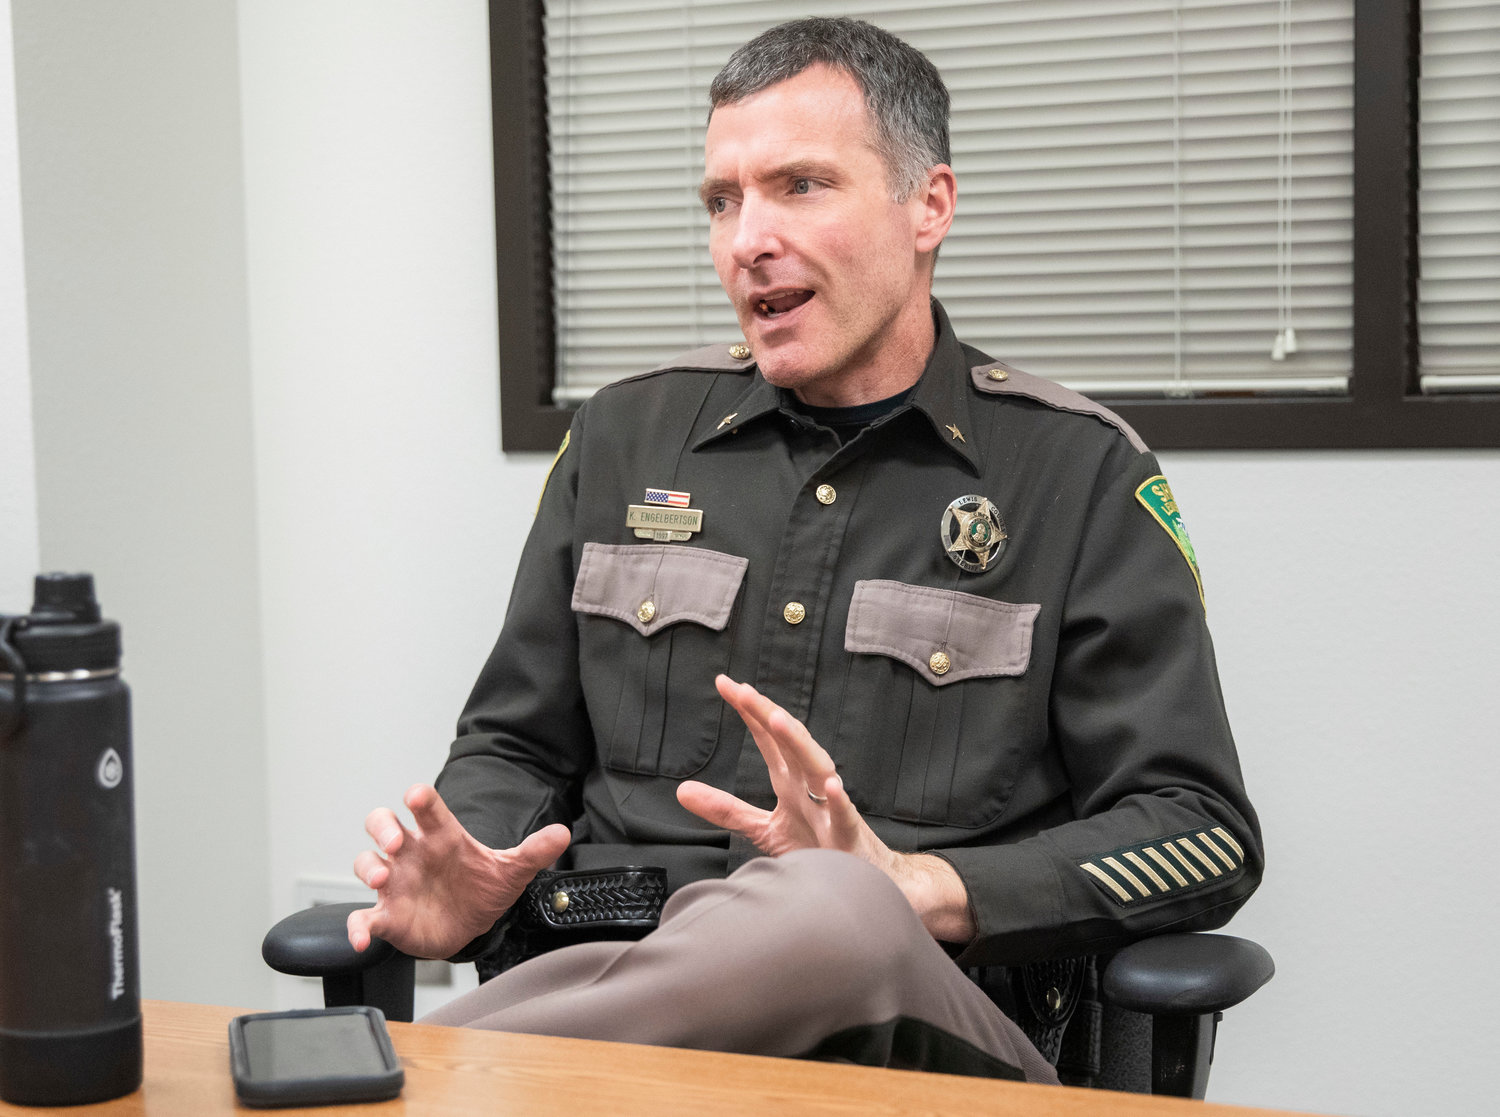 On Wednesday at the Law and Justice Center, Lewis County Sheriff’s Office Special Services Chief Kevin Engelbertson talks about the steps detectives take to prevent jeopardizing ongoing investigations.